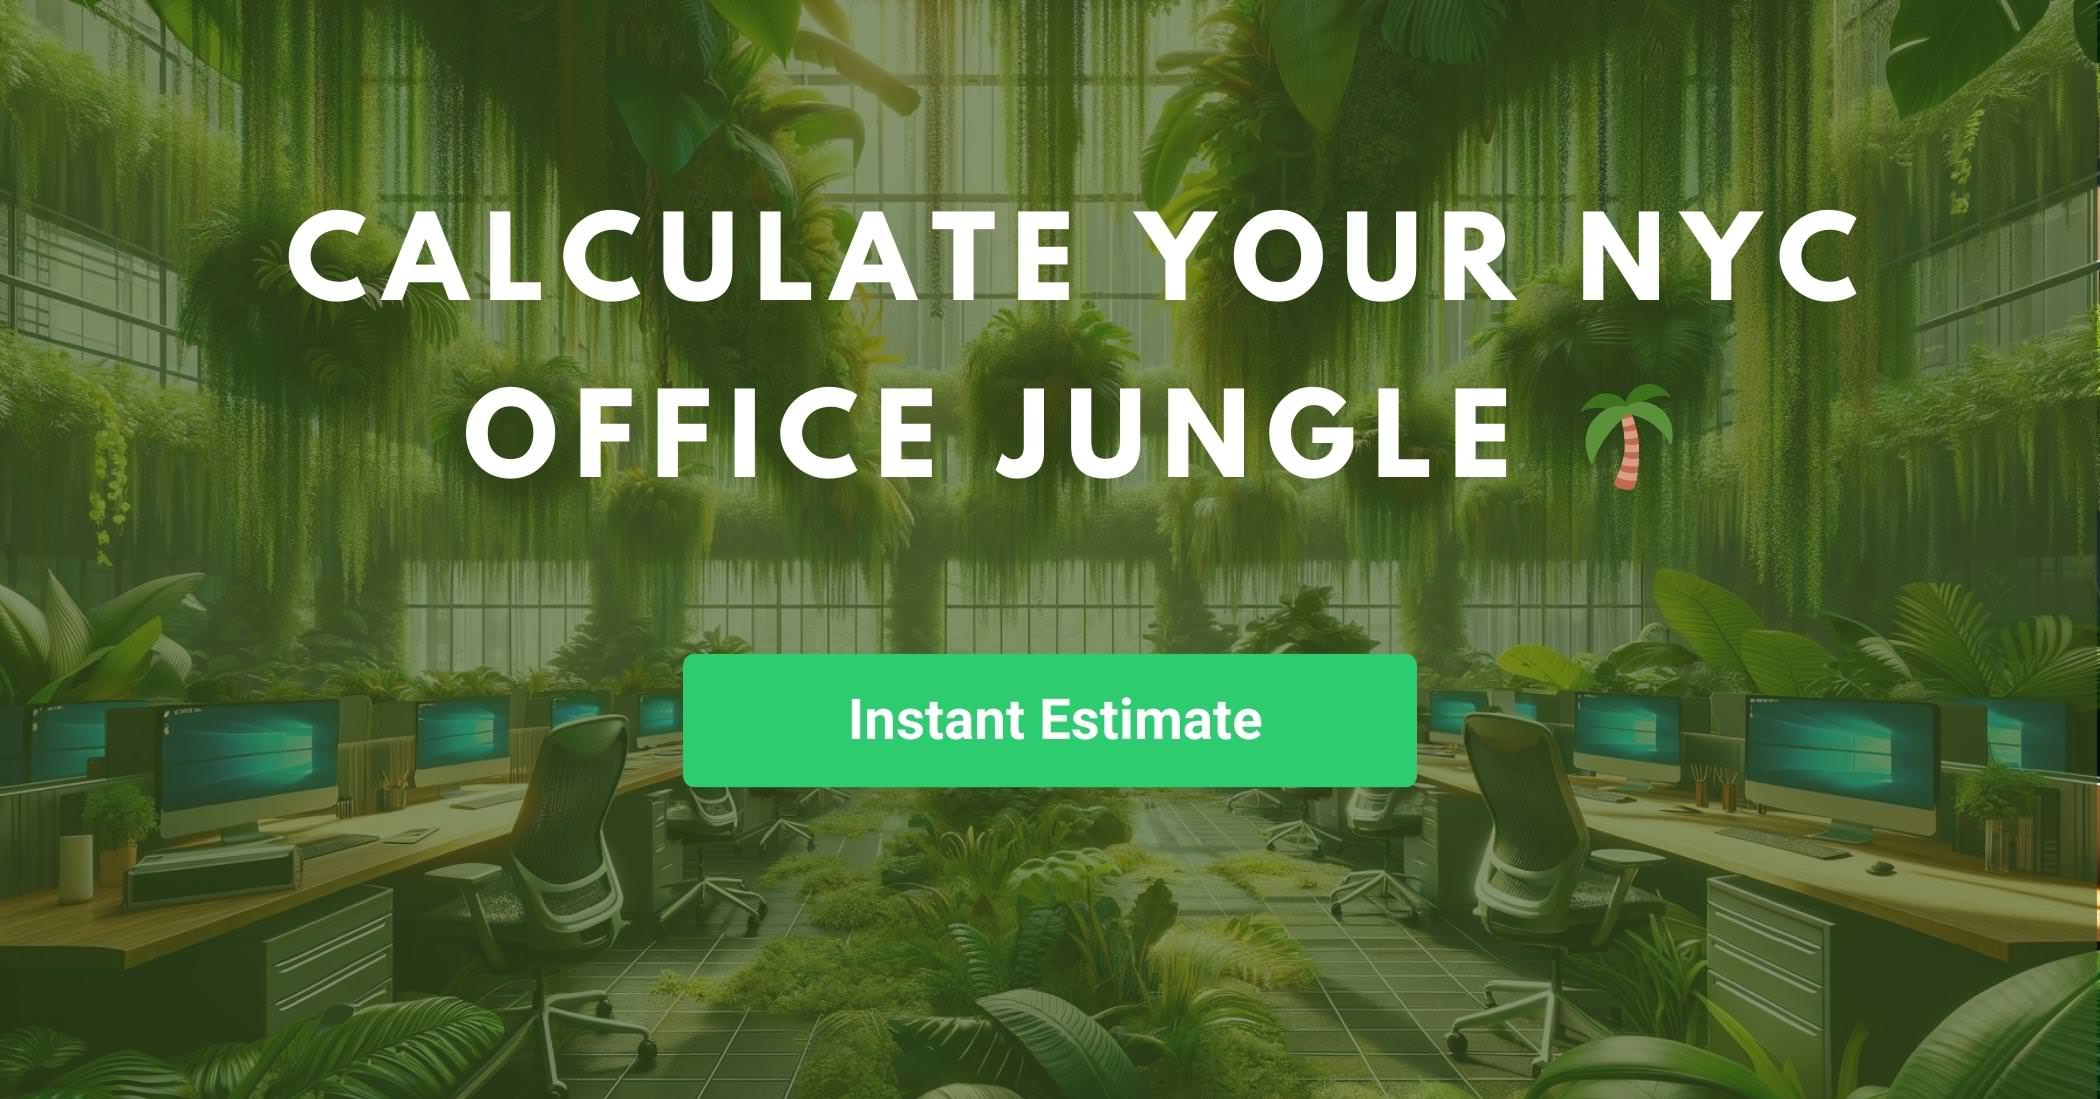 CALCULATE YOUR NYC OFFICE JUNGLE